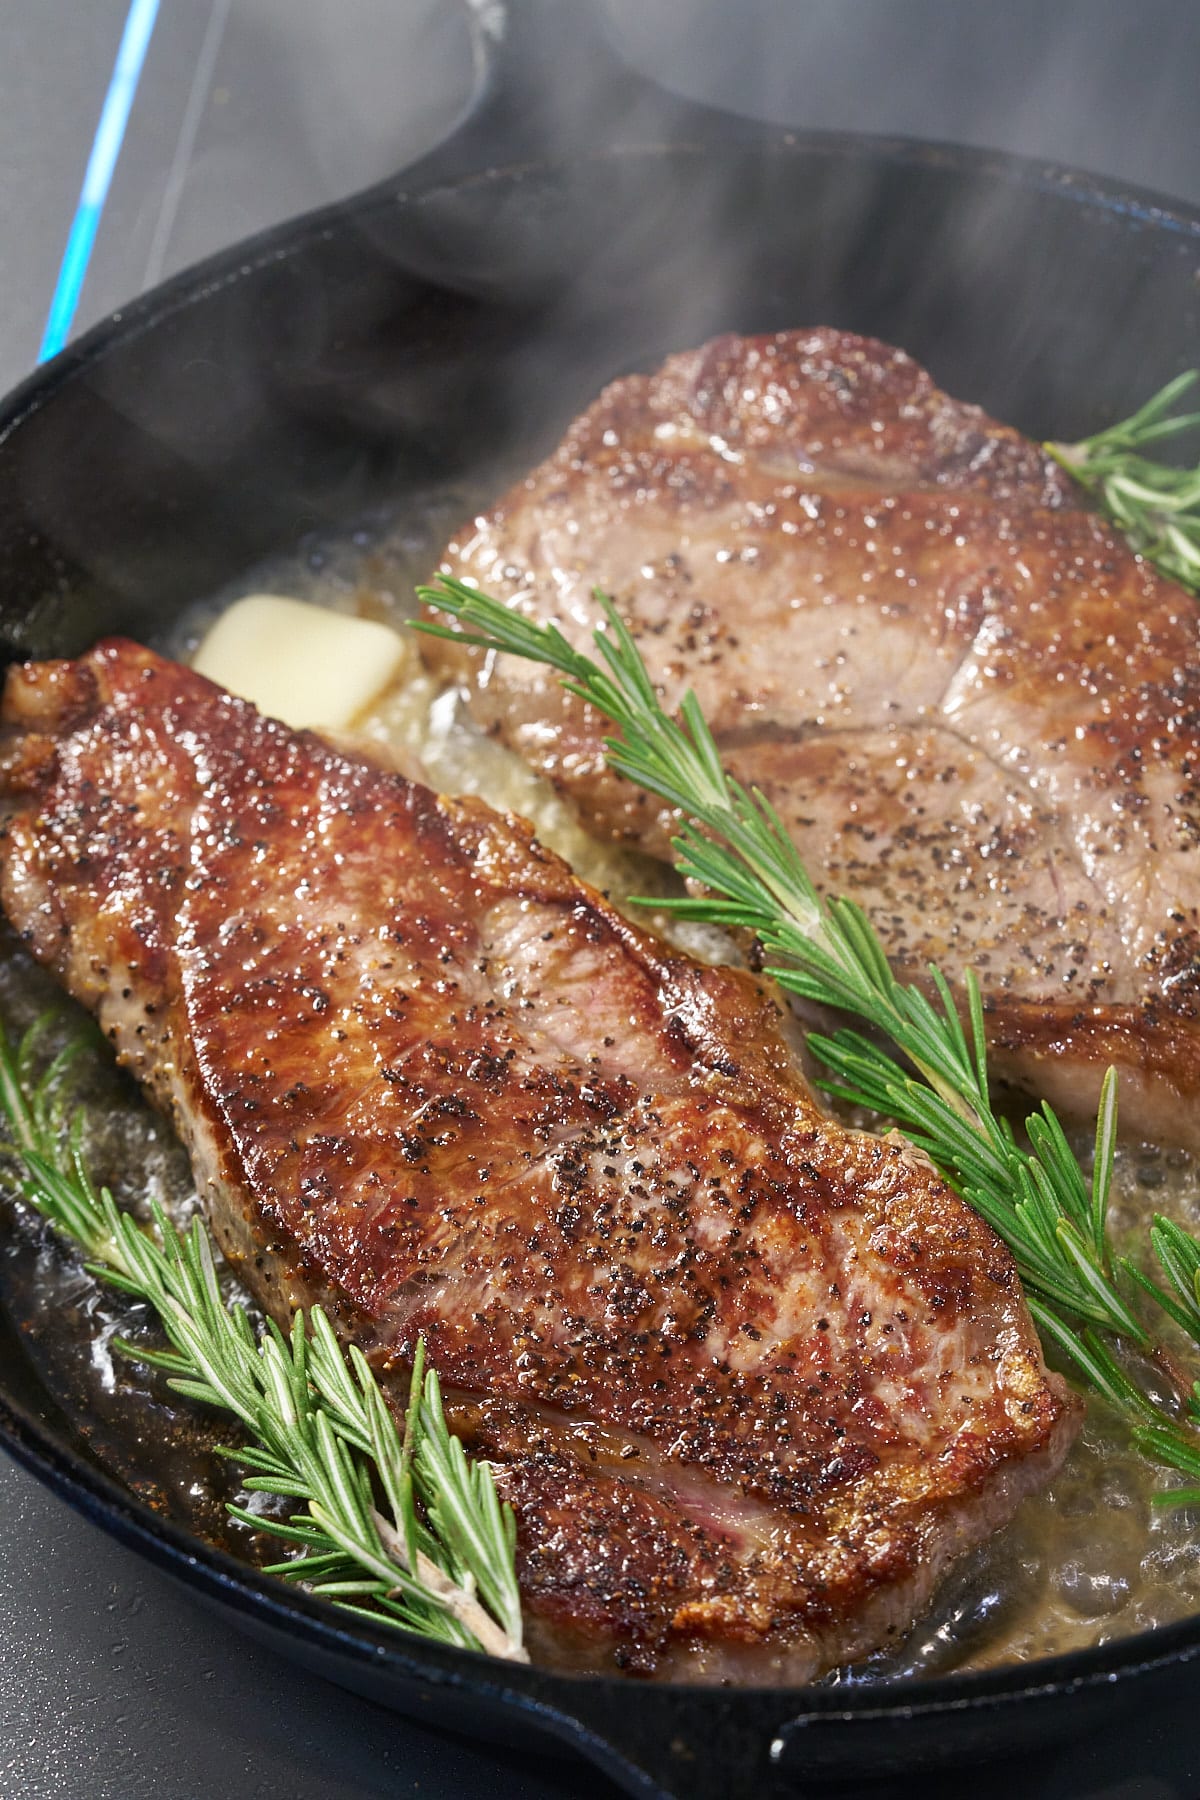 Two seared sirloin steaks in a cast iron skillet with added rosemary and butter.